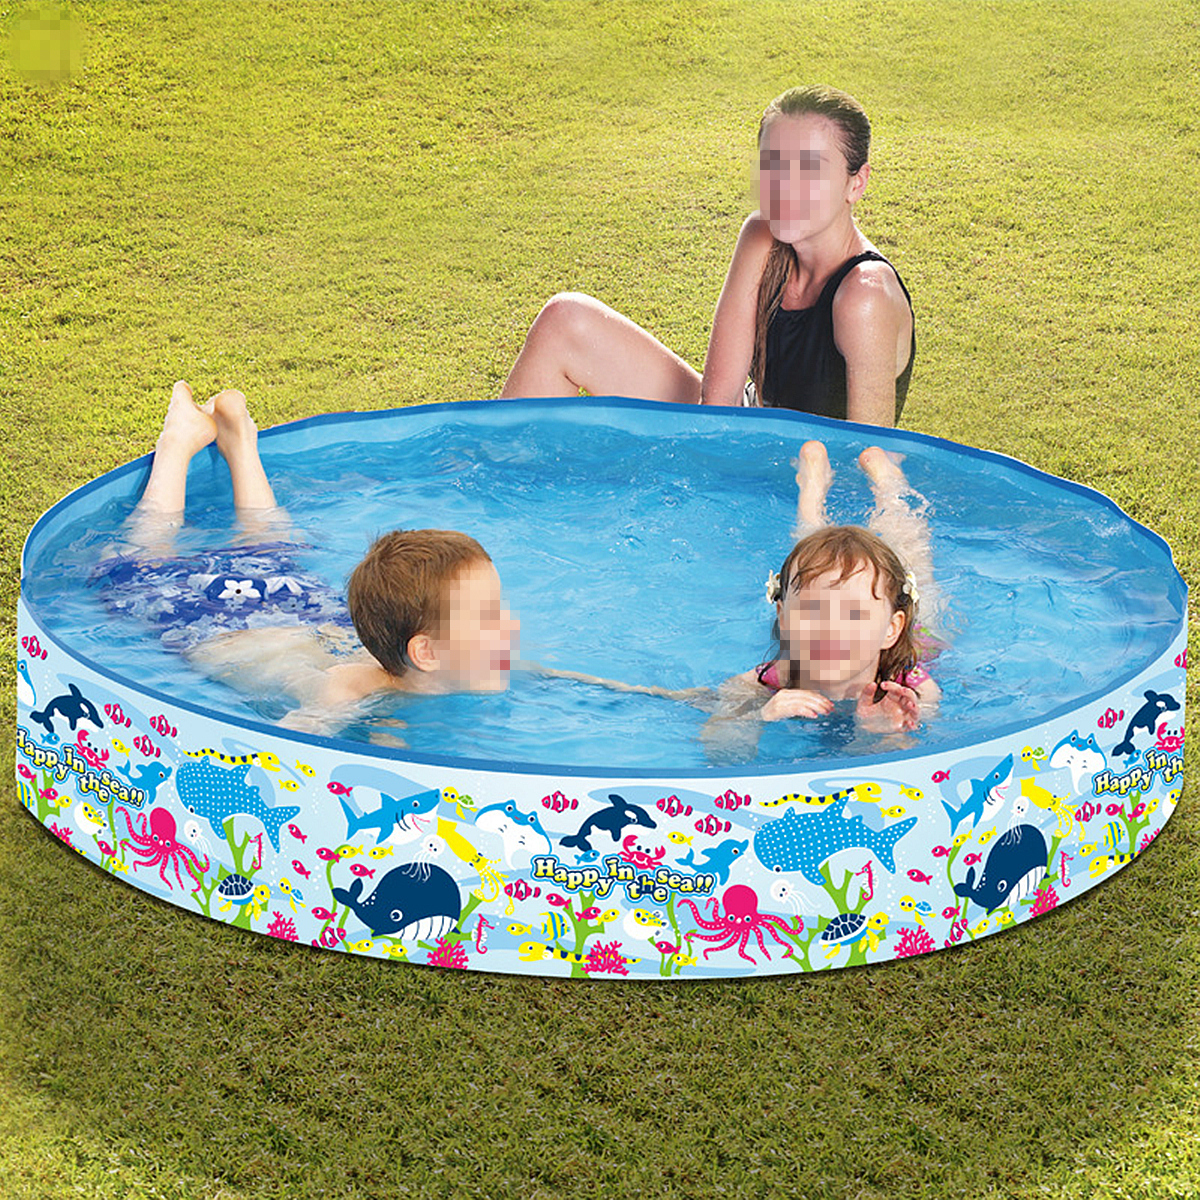 120150cm-Inflatable-Swimming-Pool-Family-Outdoor-Garden-Kid-Play-Bathtub-1697943-4